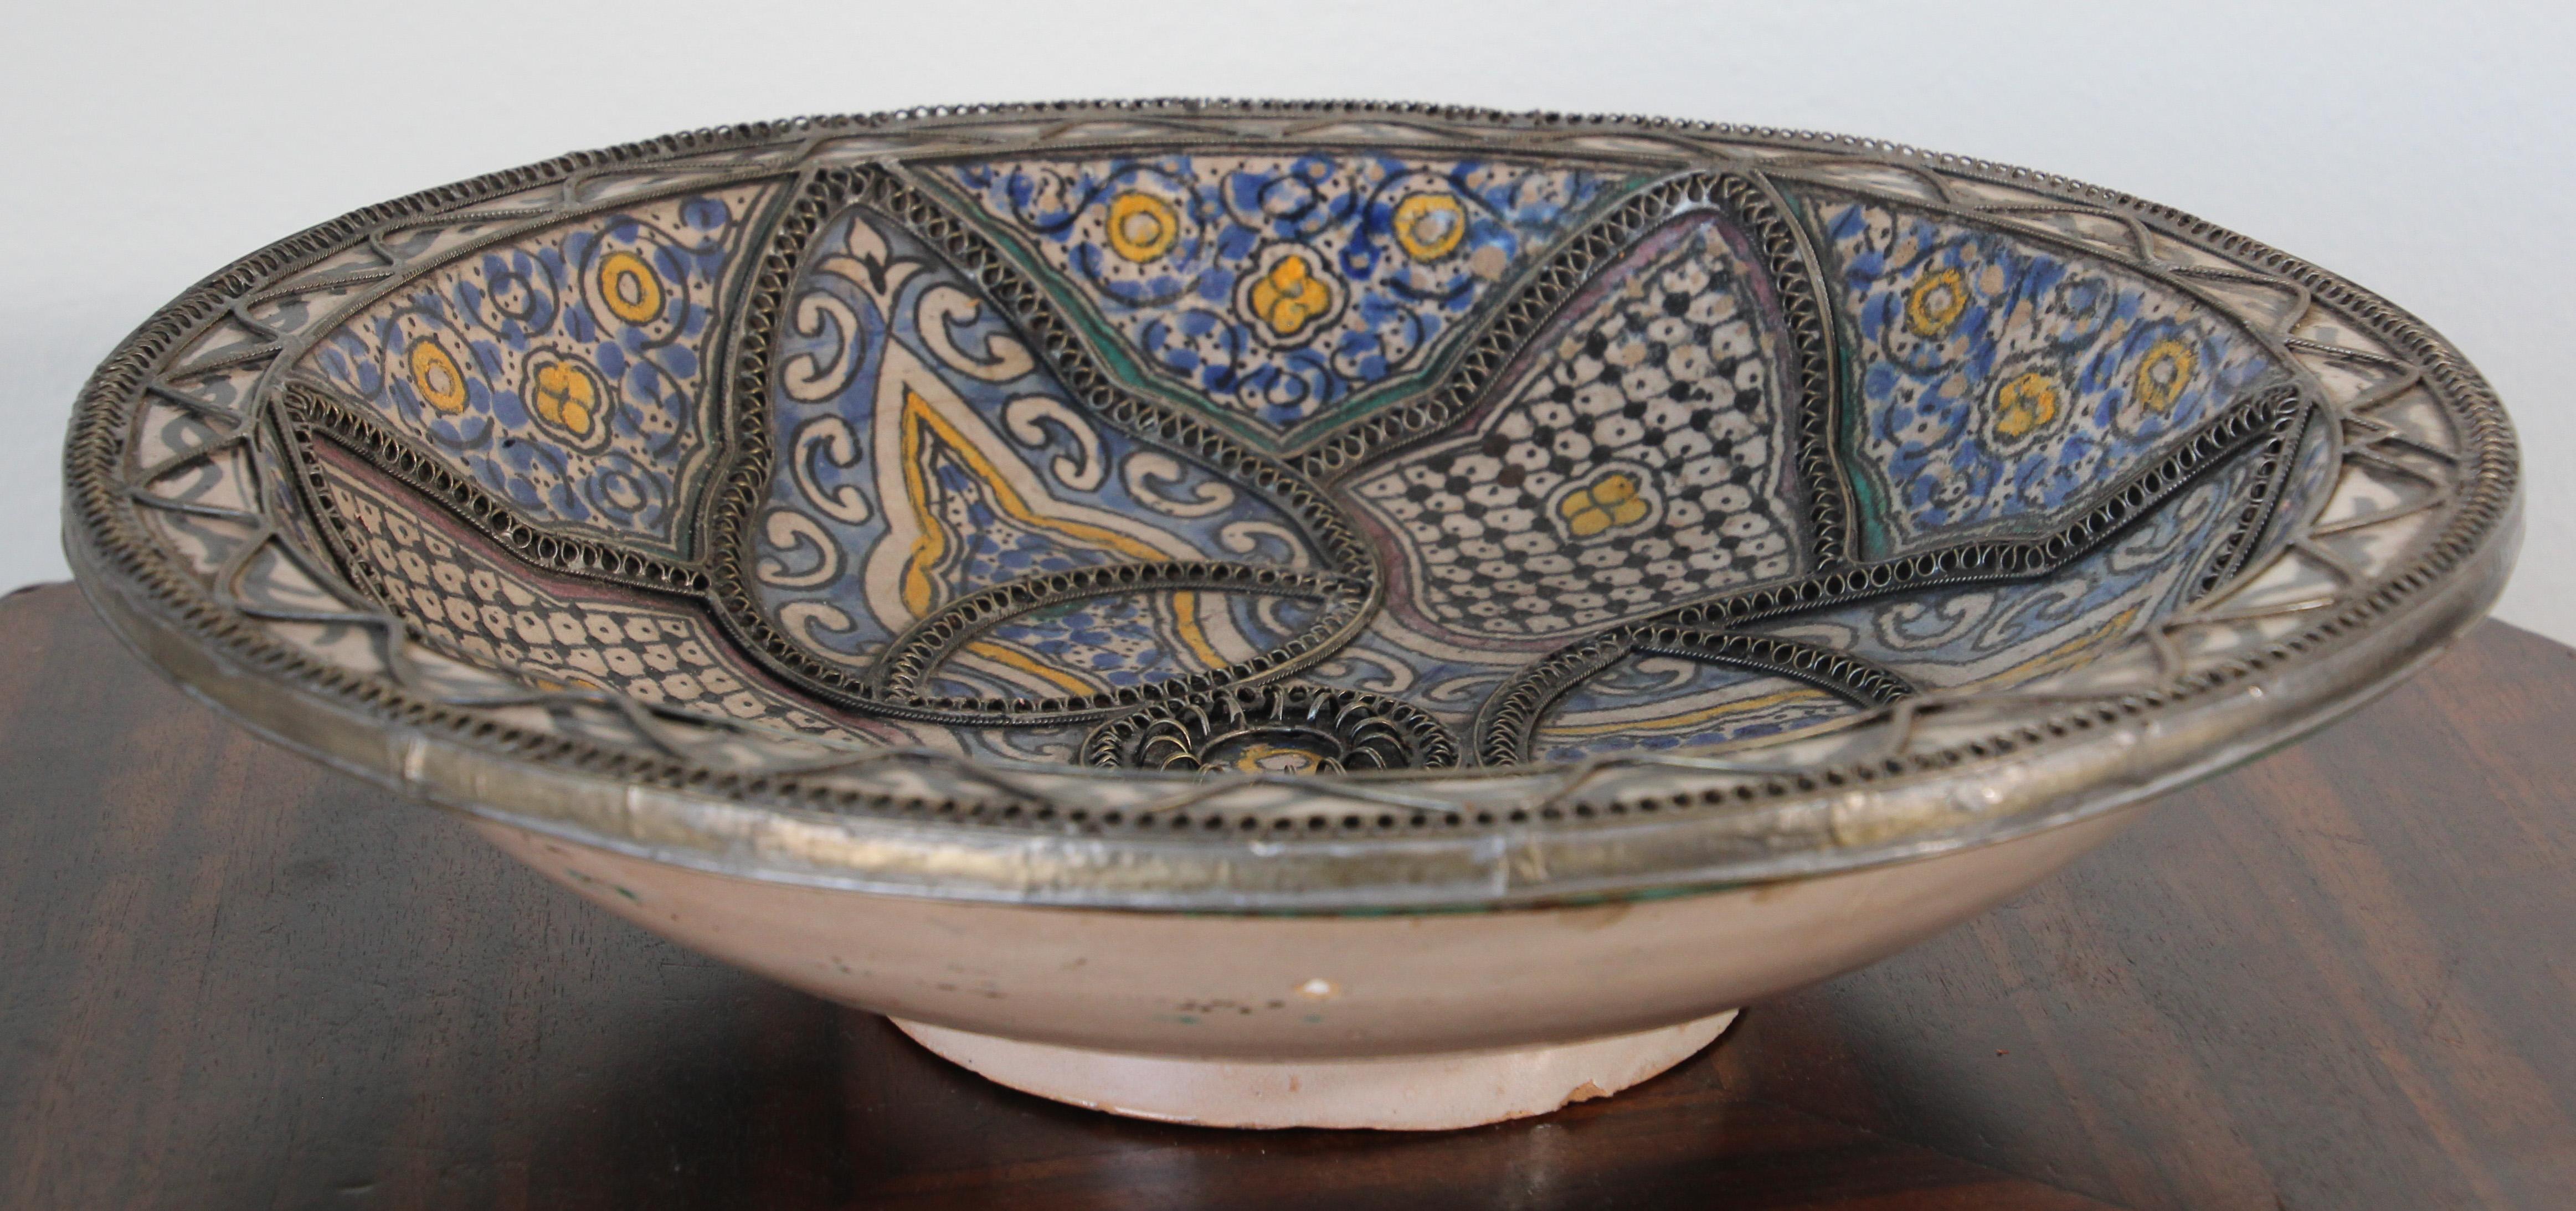 Decorative Moroccan Moorish Handcrafted Ceramic Bowl Dish from Fez For Sale 11